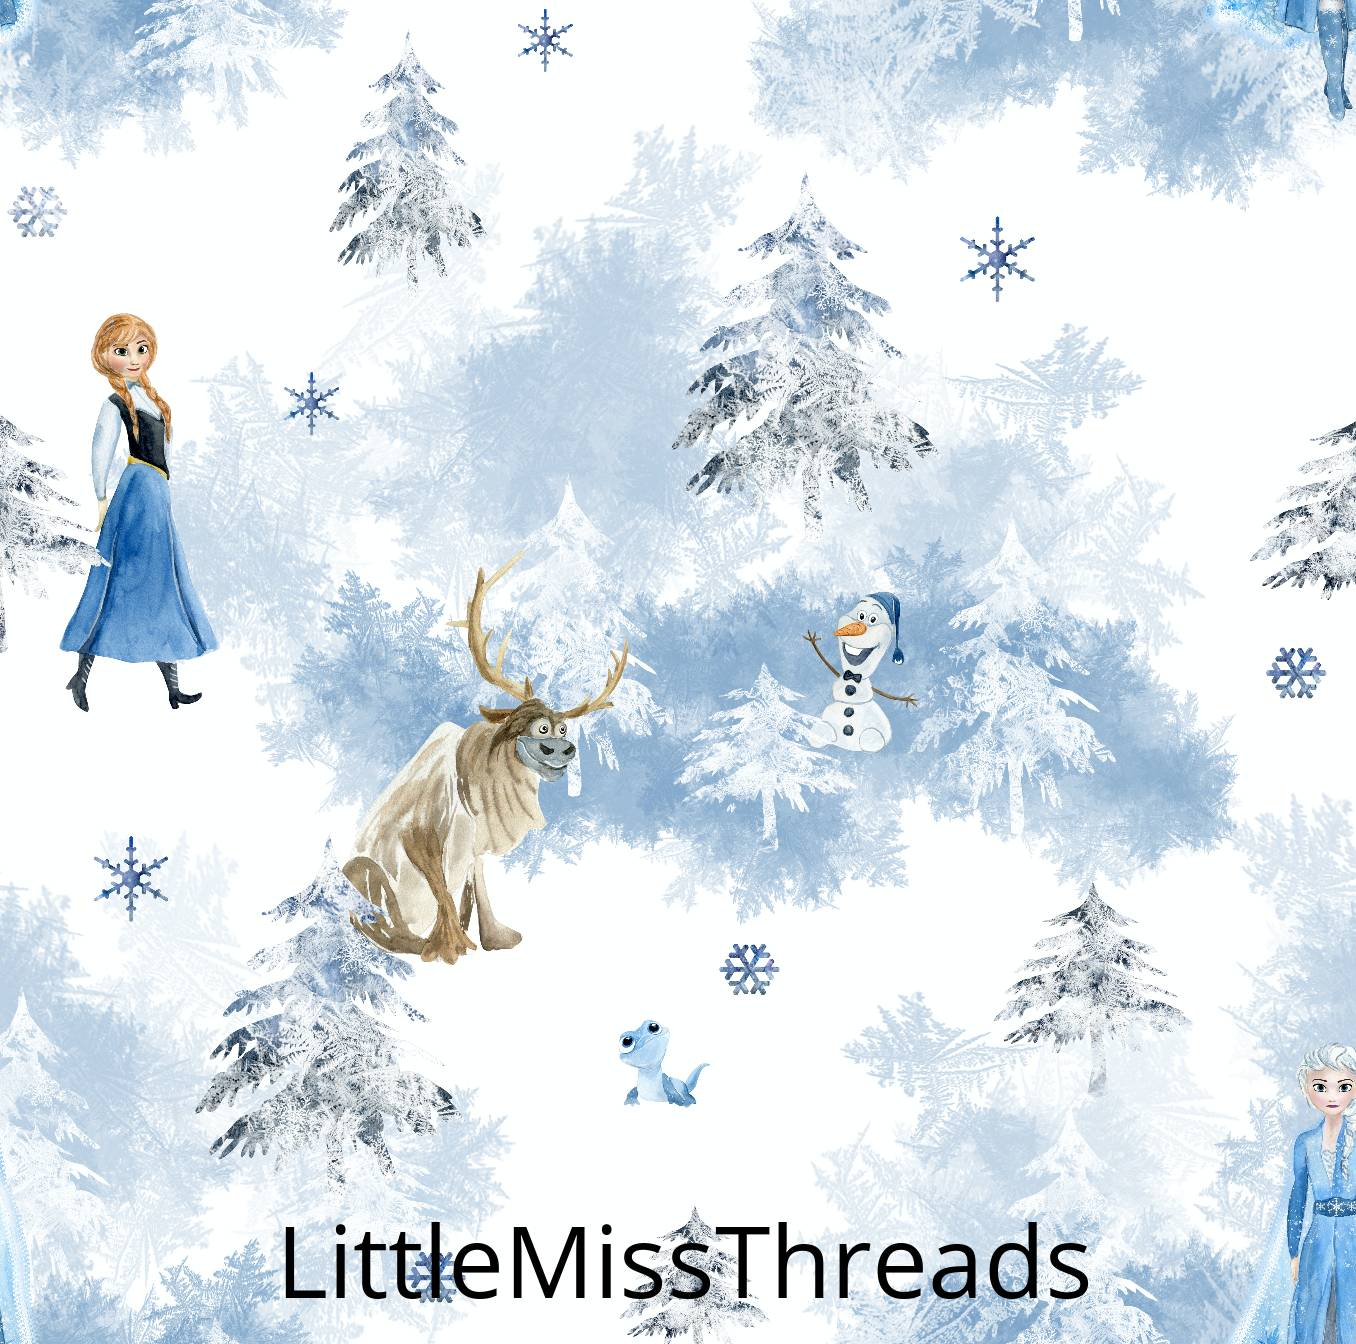 PRE ORDER - Frozen 2 White Snow - Fabric - Fabric from [store] by Little Miss Threads - 